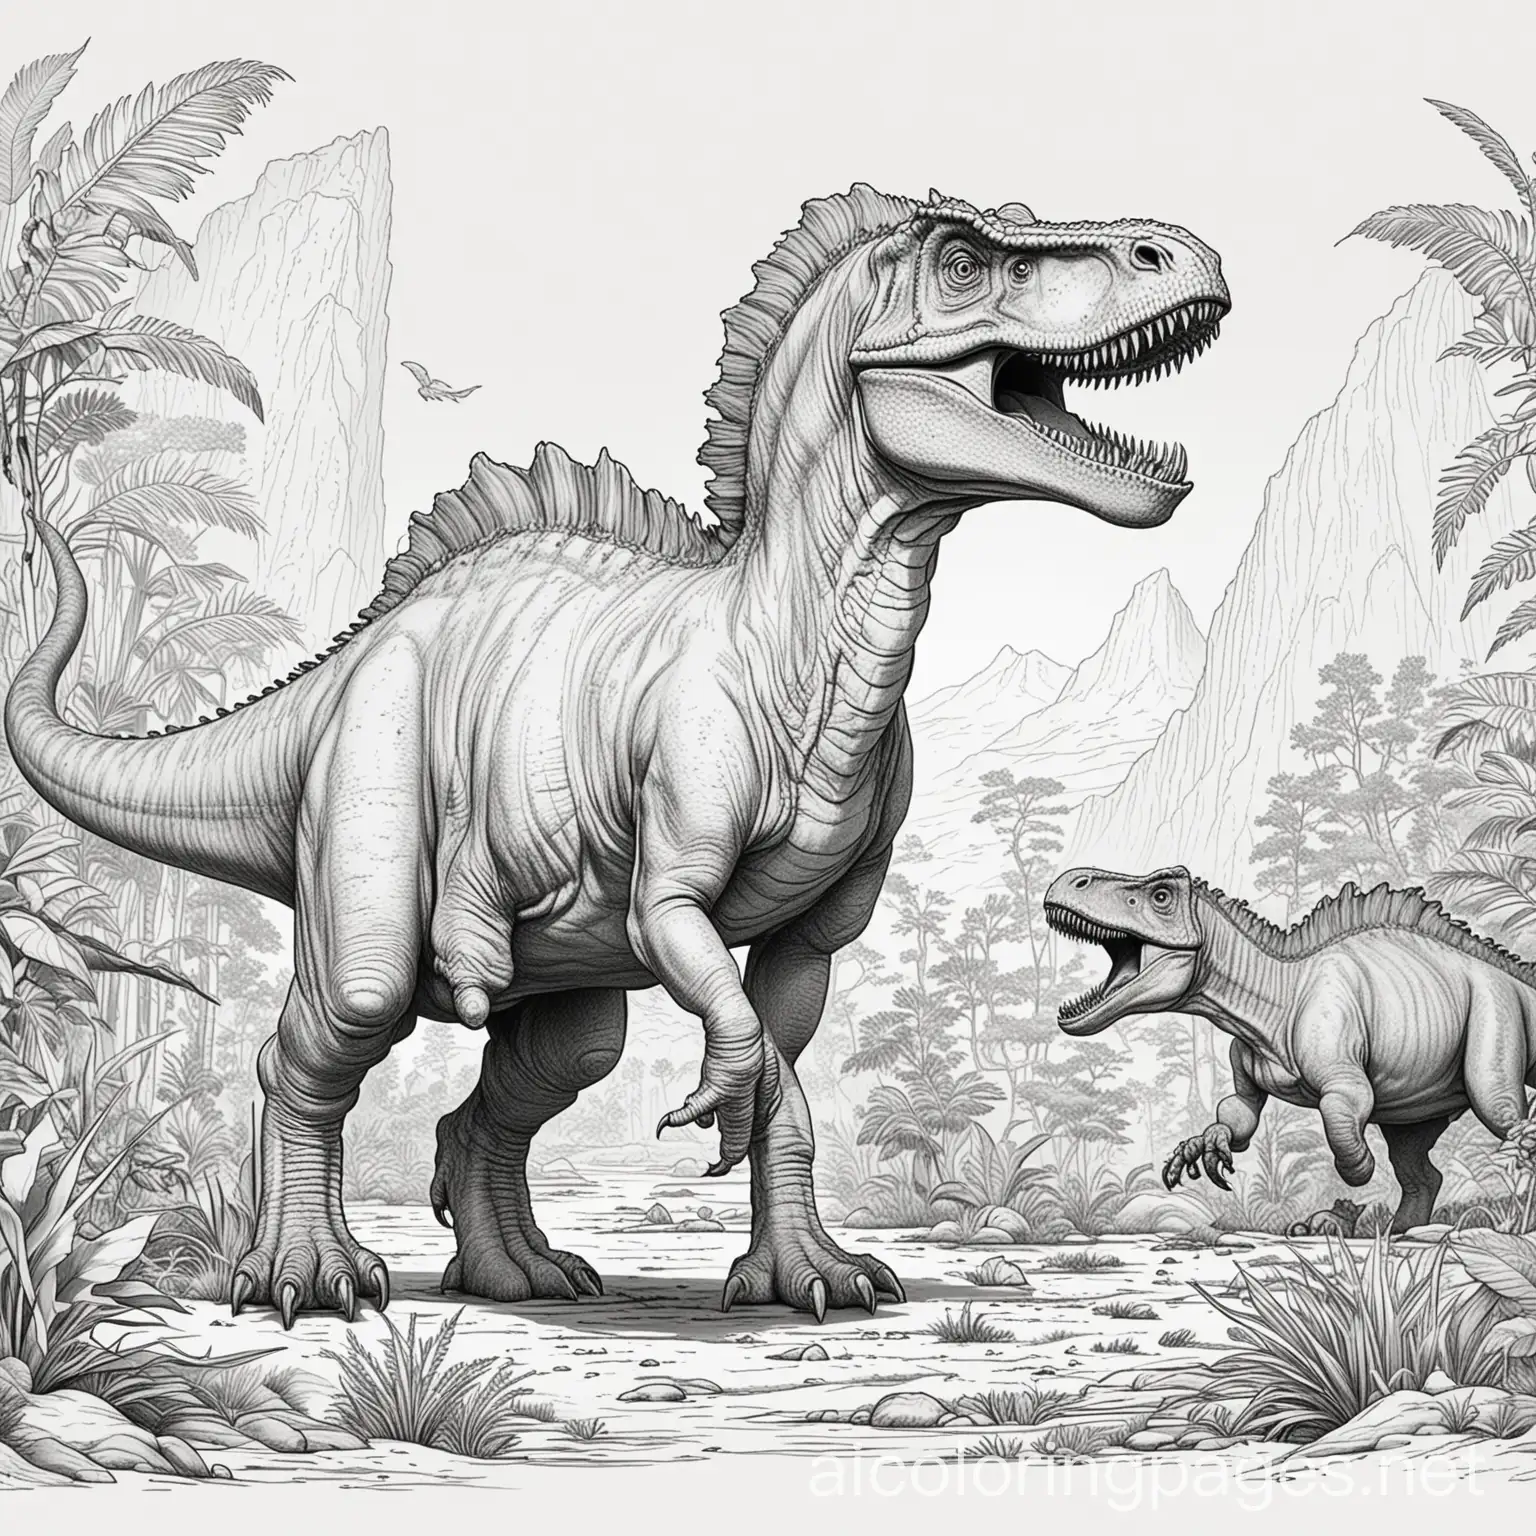 Go back in time to the age of dinosaurs. What colors would you use to bring these ancient creatures and their environment to life?, Coloring Page, black and white, line art, white background, Simplicity, Ample White Space. The background of the coloring page is plain white to make it easy for young children to color within the lines. The outlines of all the subjects are easy to distinguish, making it simple for kids to color without too much difficulty